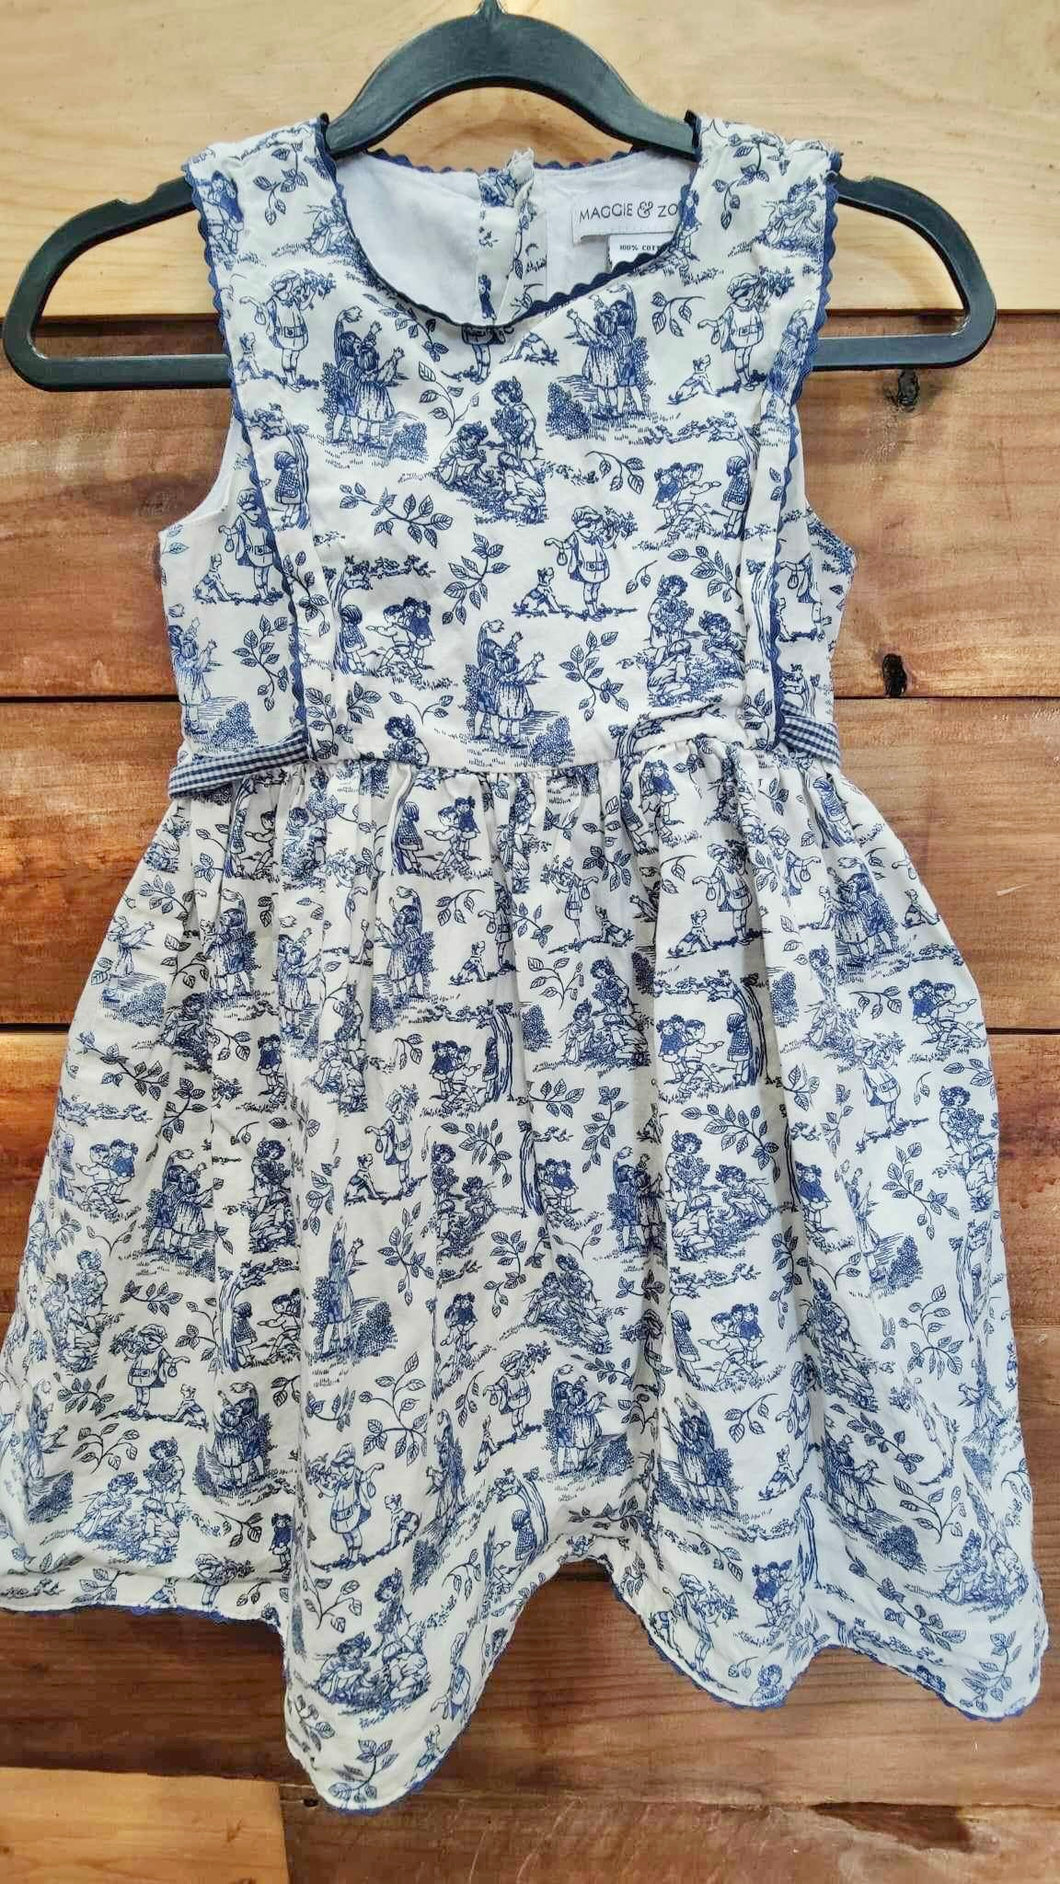 Maggie & Zoe Vintage Country Dress Size 4T